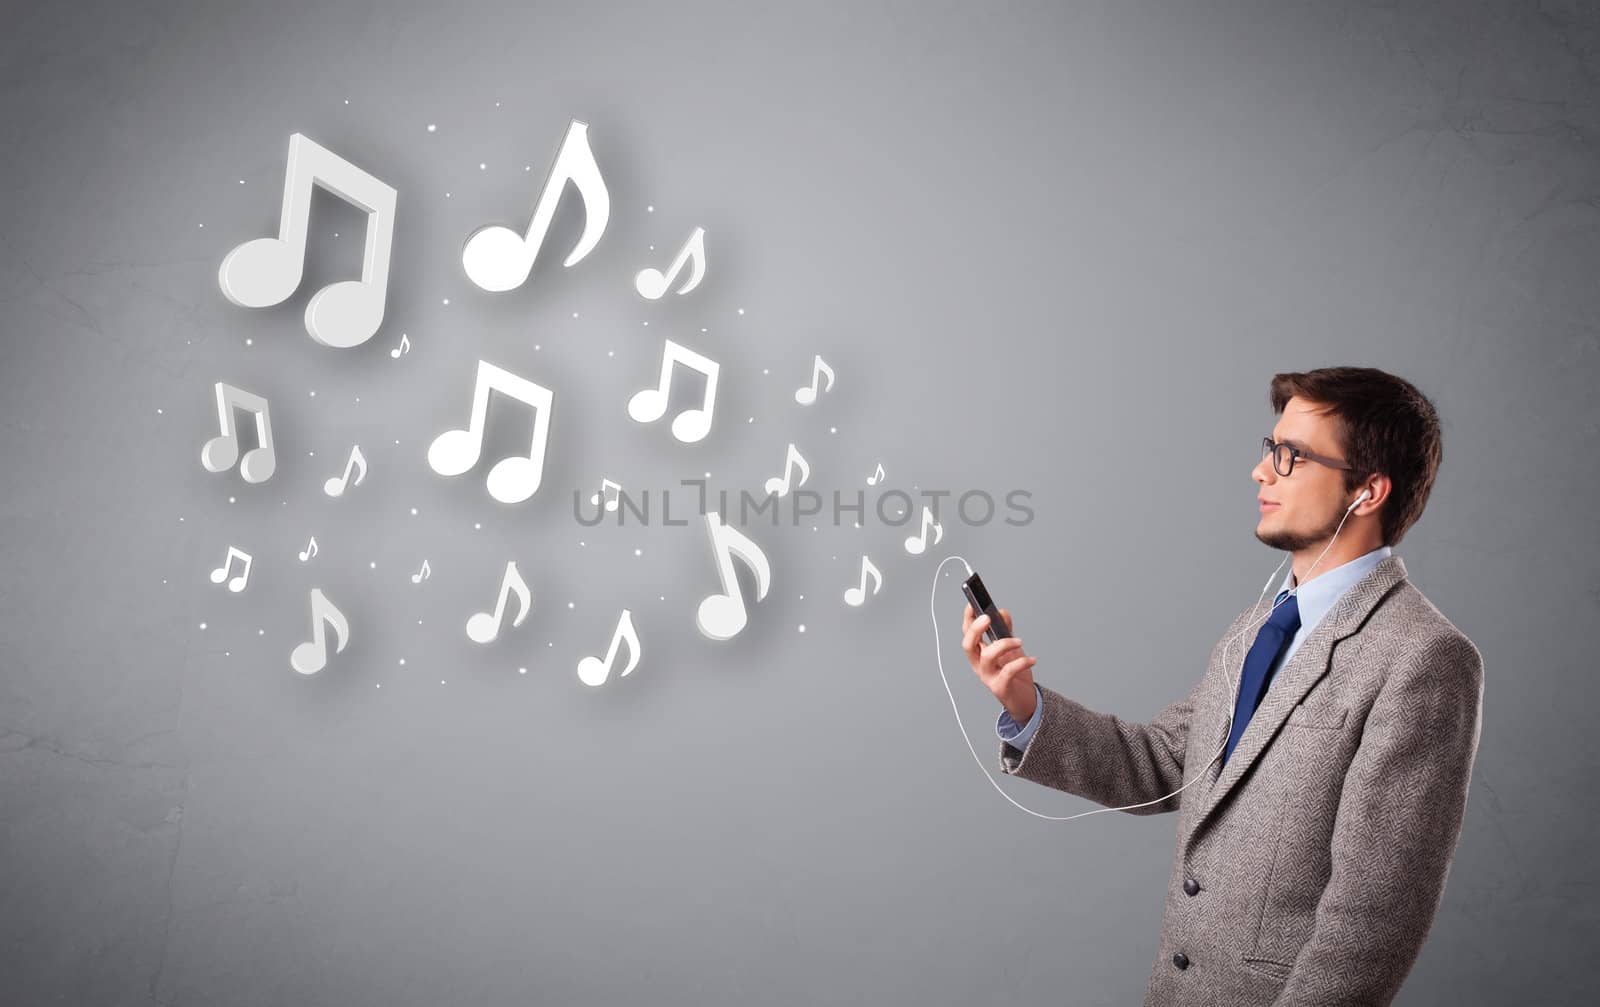 attractive young man singing and listening to music with musical notes getting out of his mouth